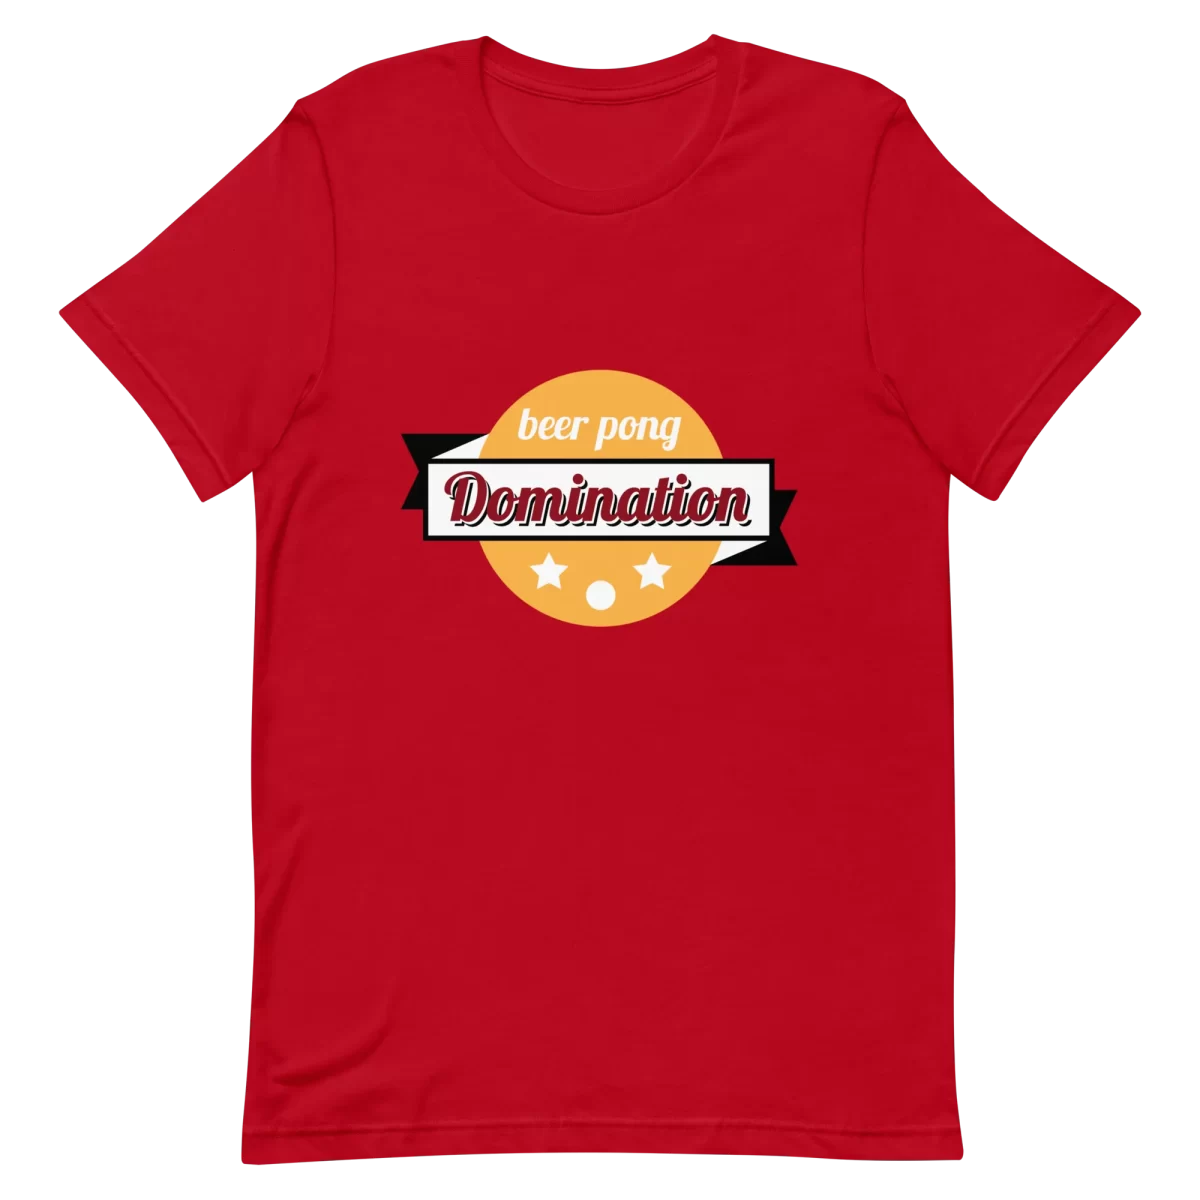 Unisex T-Shirt - Beer Pong Domination - Red